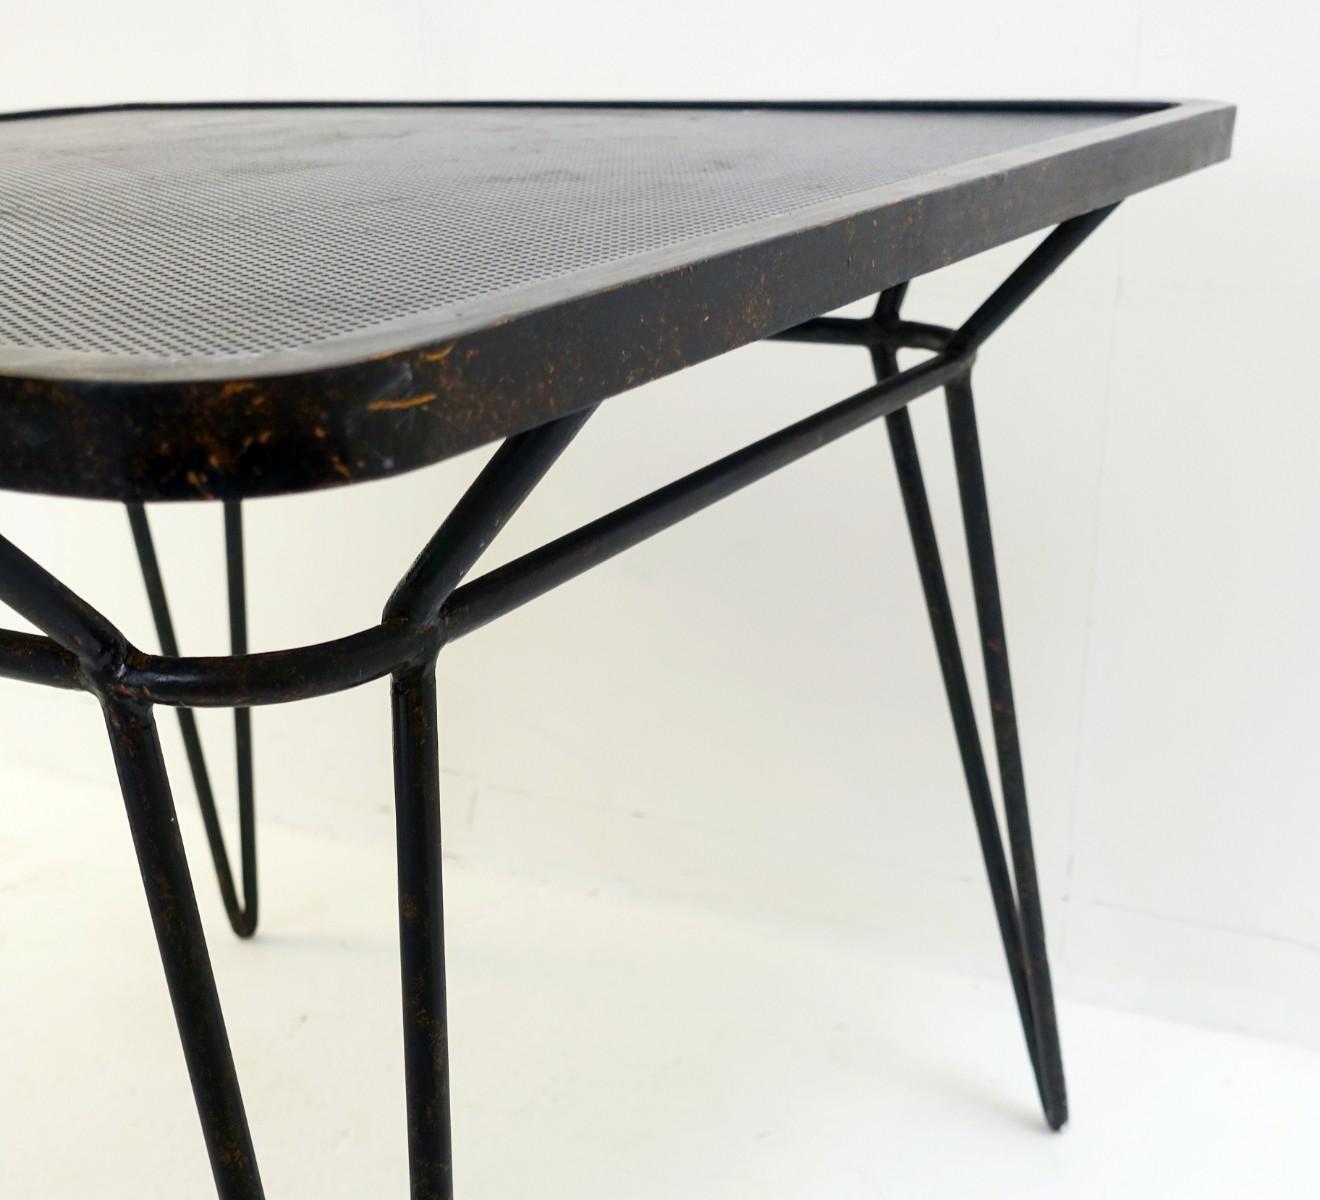 Wrought iron square table by Ico Parisi.